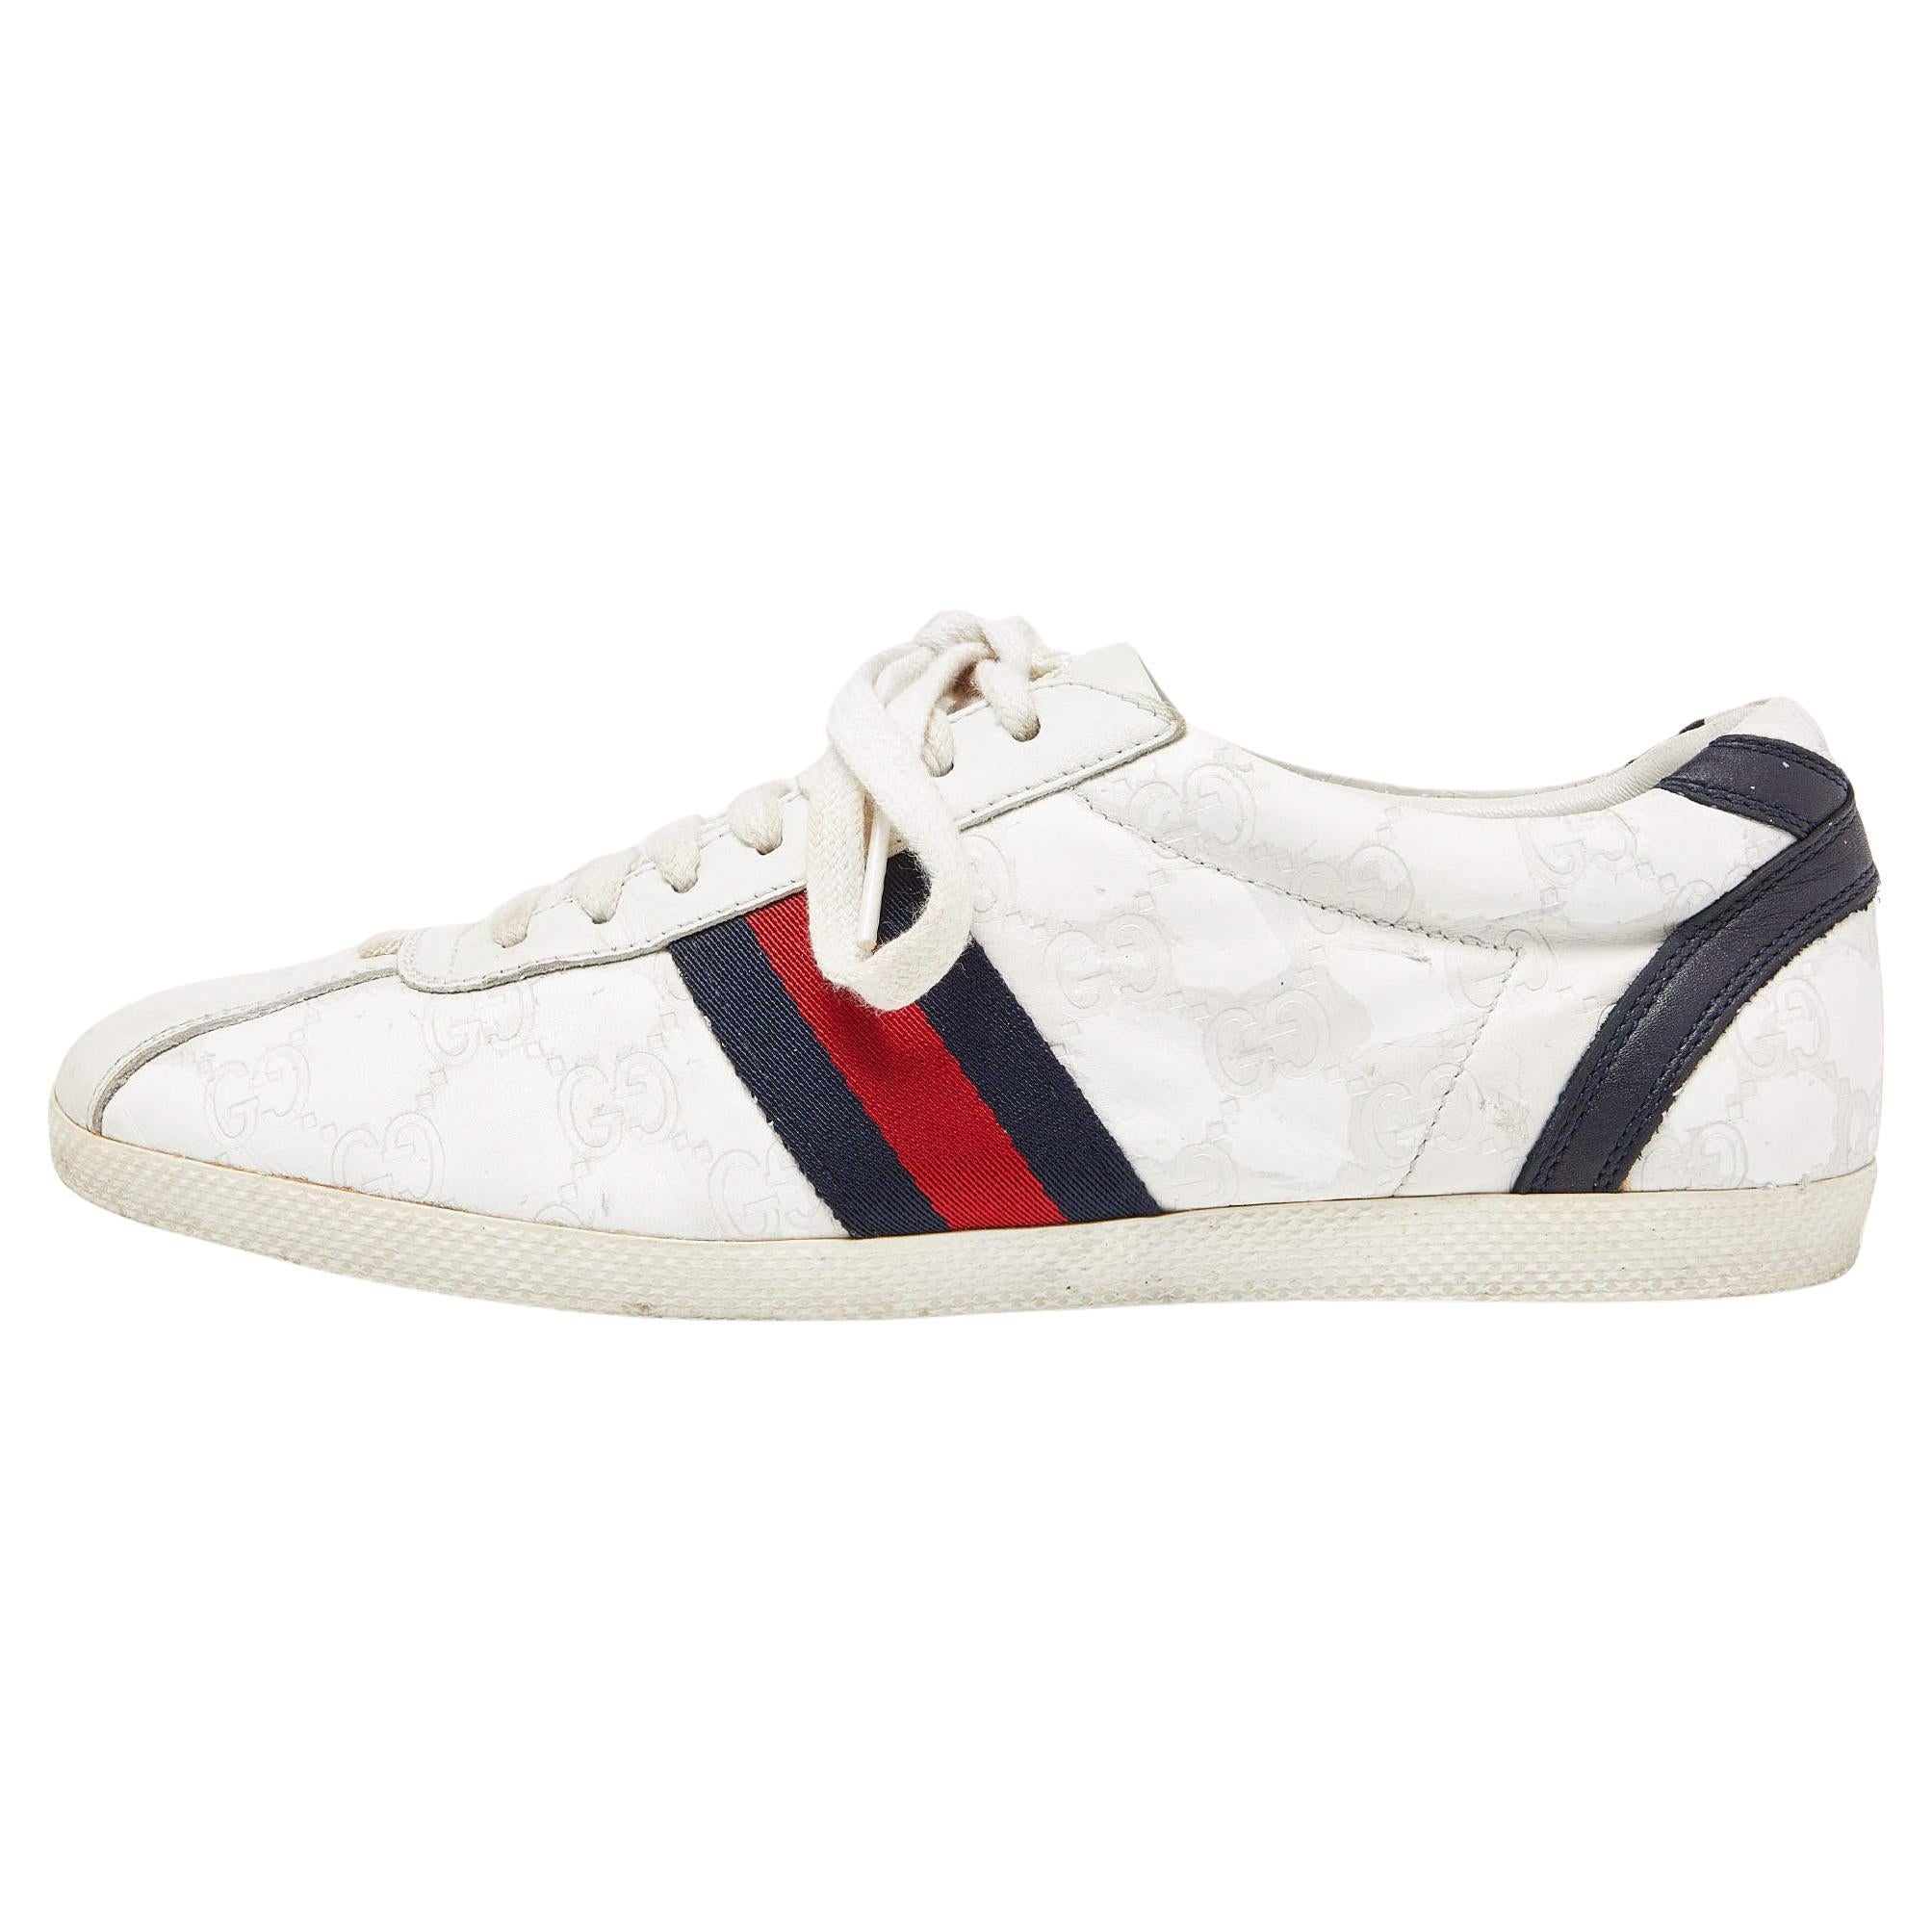 Gucci White Guccissima Leather Web Low Top Sneakers Size 37 For Sale